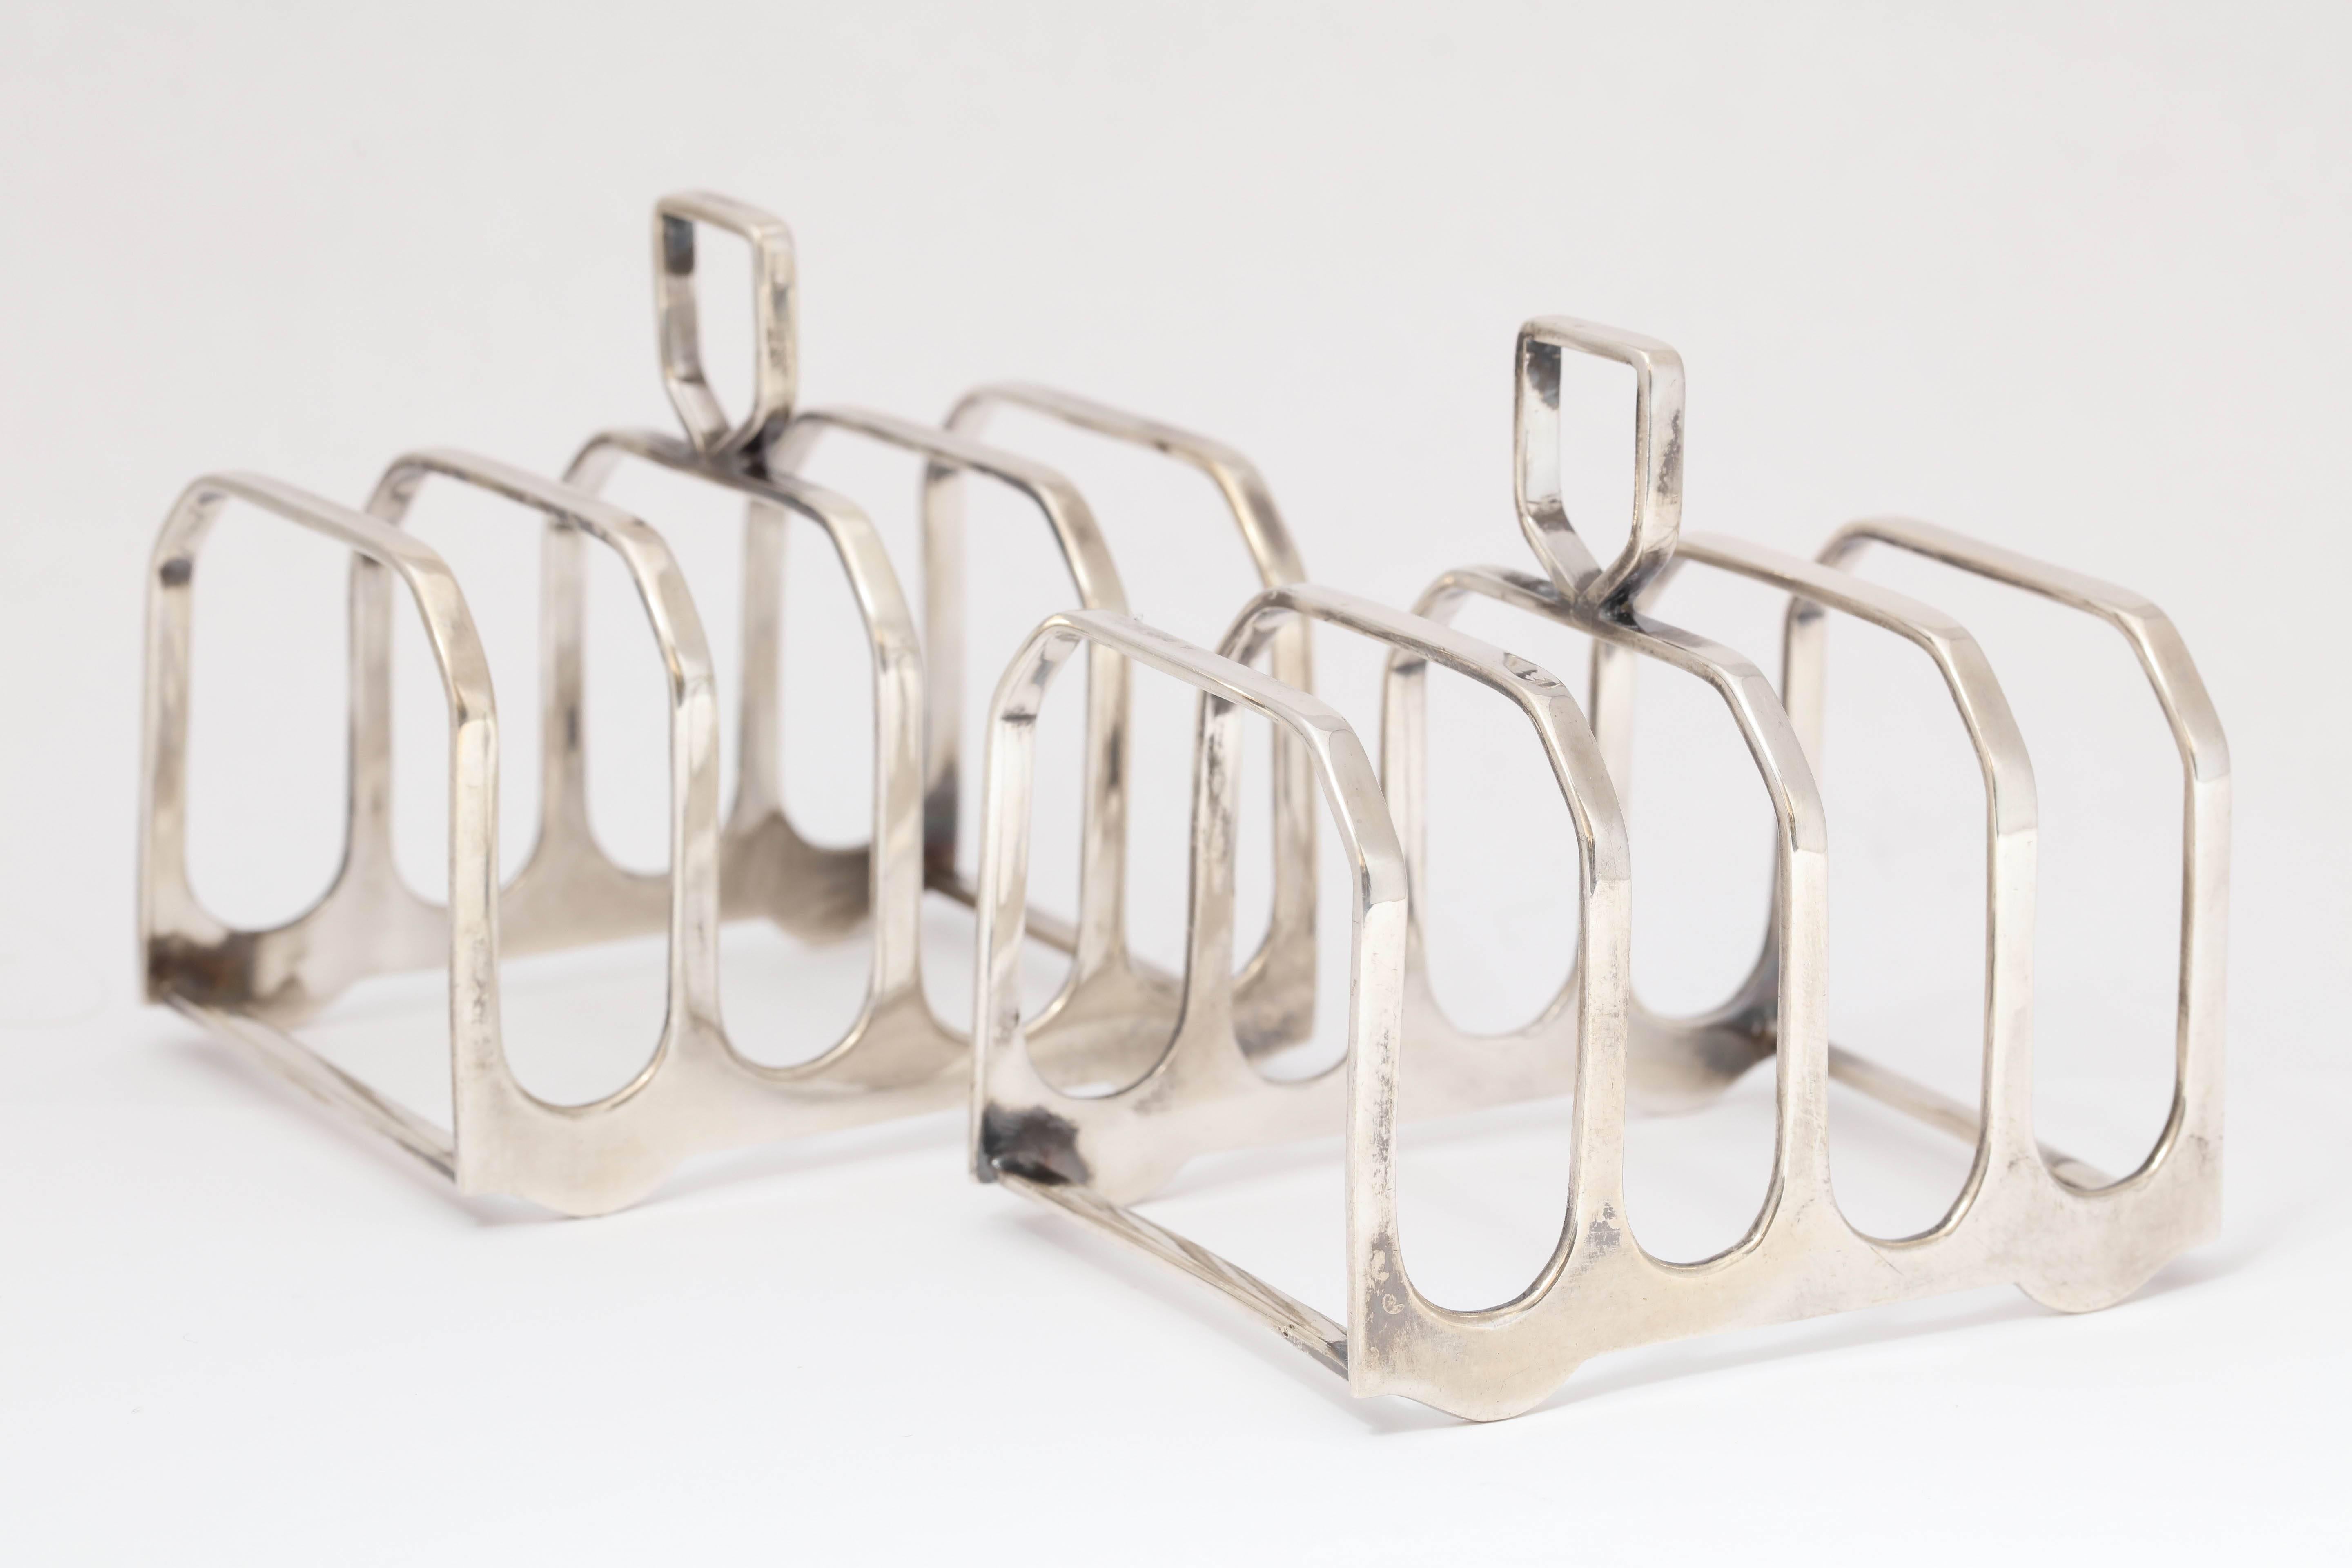 Edwardian-style pair of sterling silver toast racks, Birmingham, England, 1965, Elkington and Co., Ltd. - makers. Measures: Each is 2 3/4 inches long x over 2 inches deep x 3 inches high to top of finial/handle. Weight is 3.865 troy ounces for the